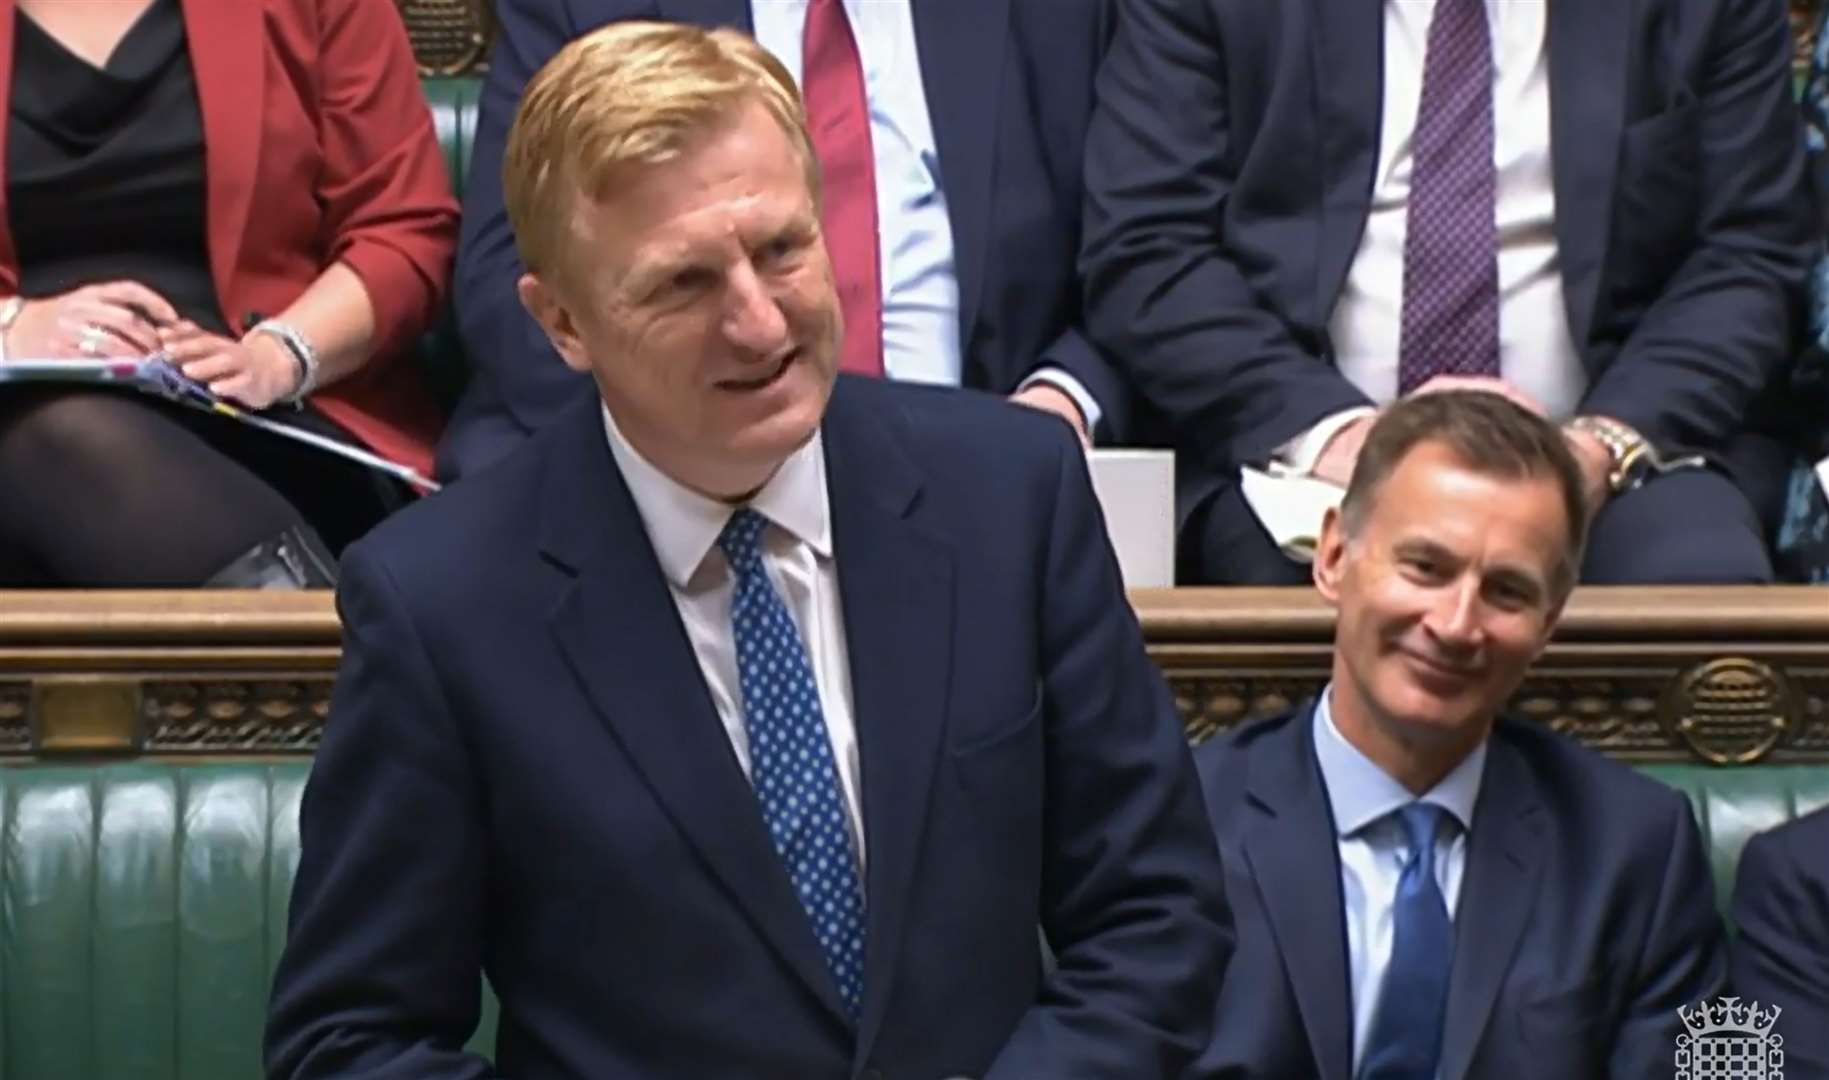 Deputy Prime Minister Oliver Dowden (House of Commons/UK Parliament/PA)